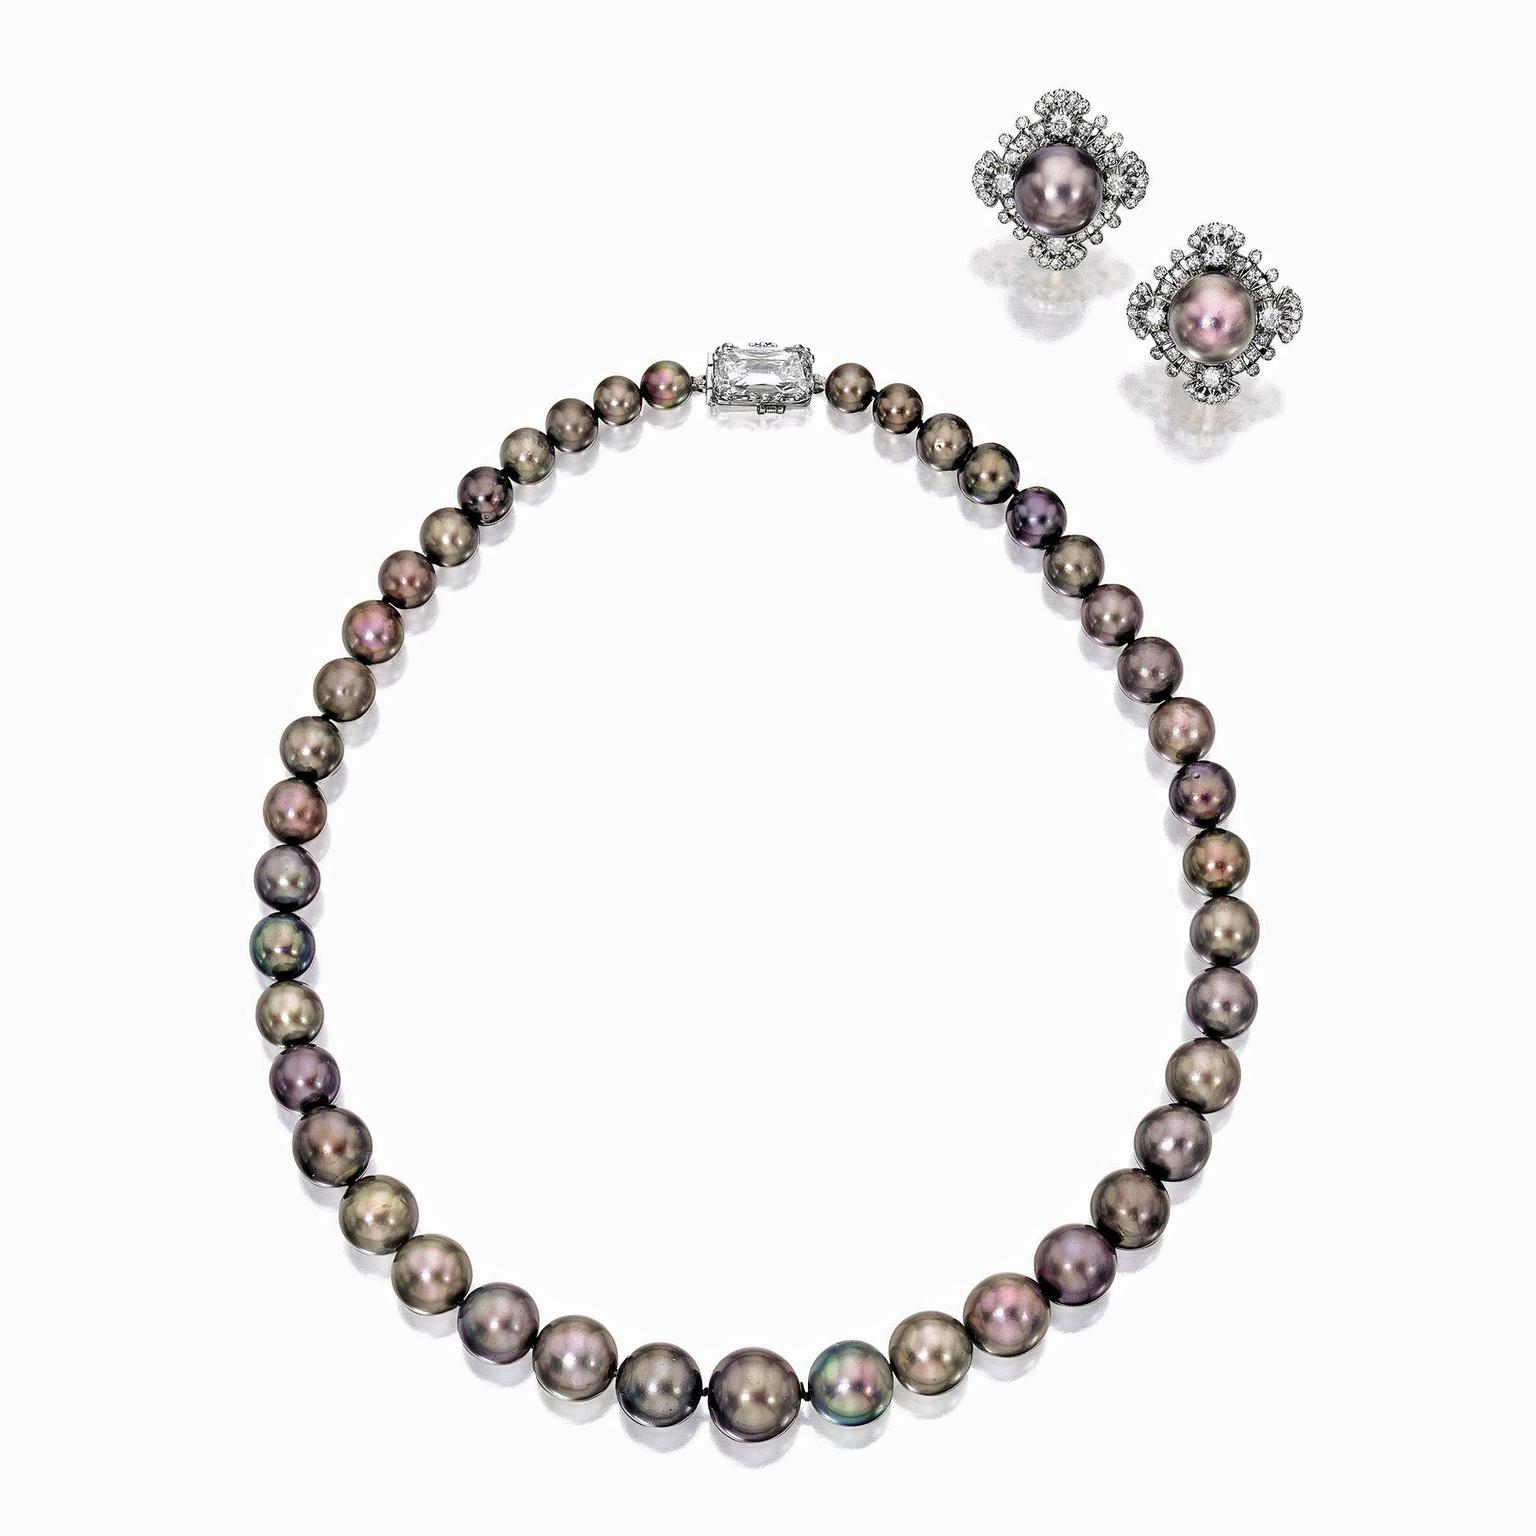 Cowdray pearls necklace and earrings